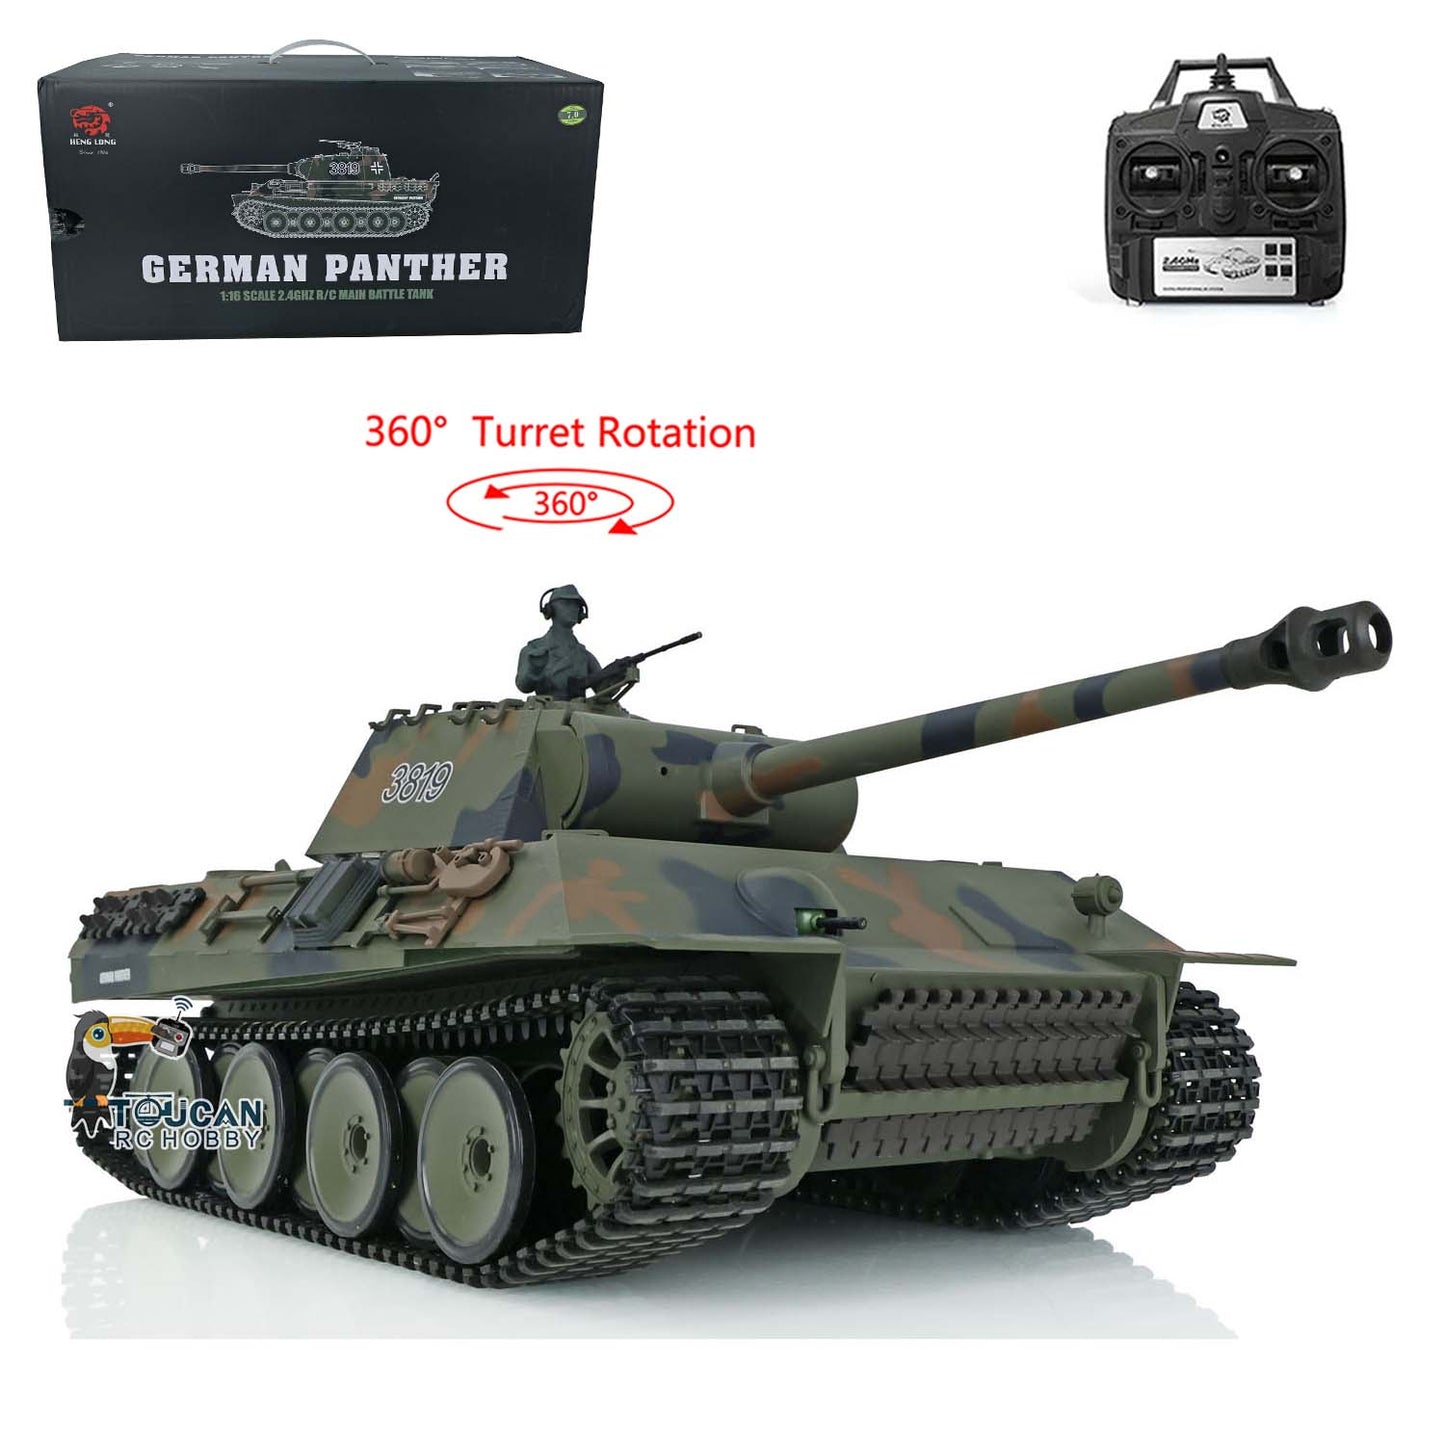 2.4Ghz Henglong 1/16 Scale 7.0 Plastic German Panther RTR RC Tank 3819 w/ 360Degrees Rotating Turret Sound Effect Outdoor Tank for Boys